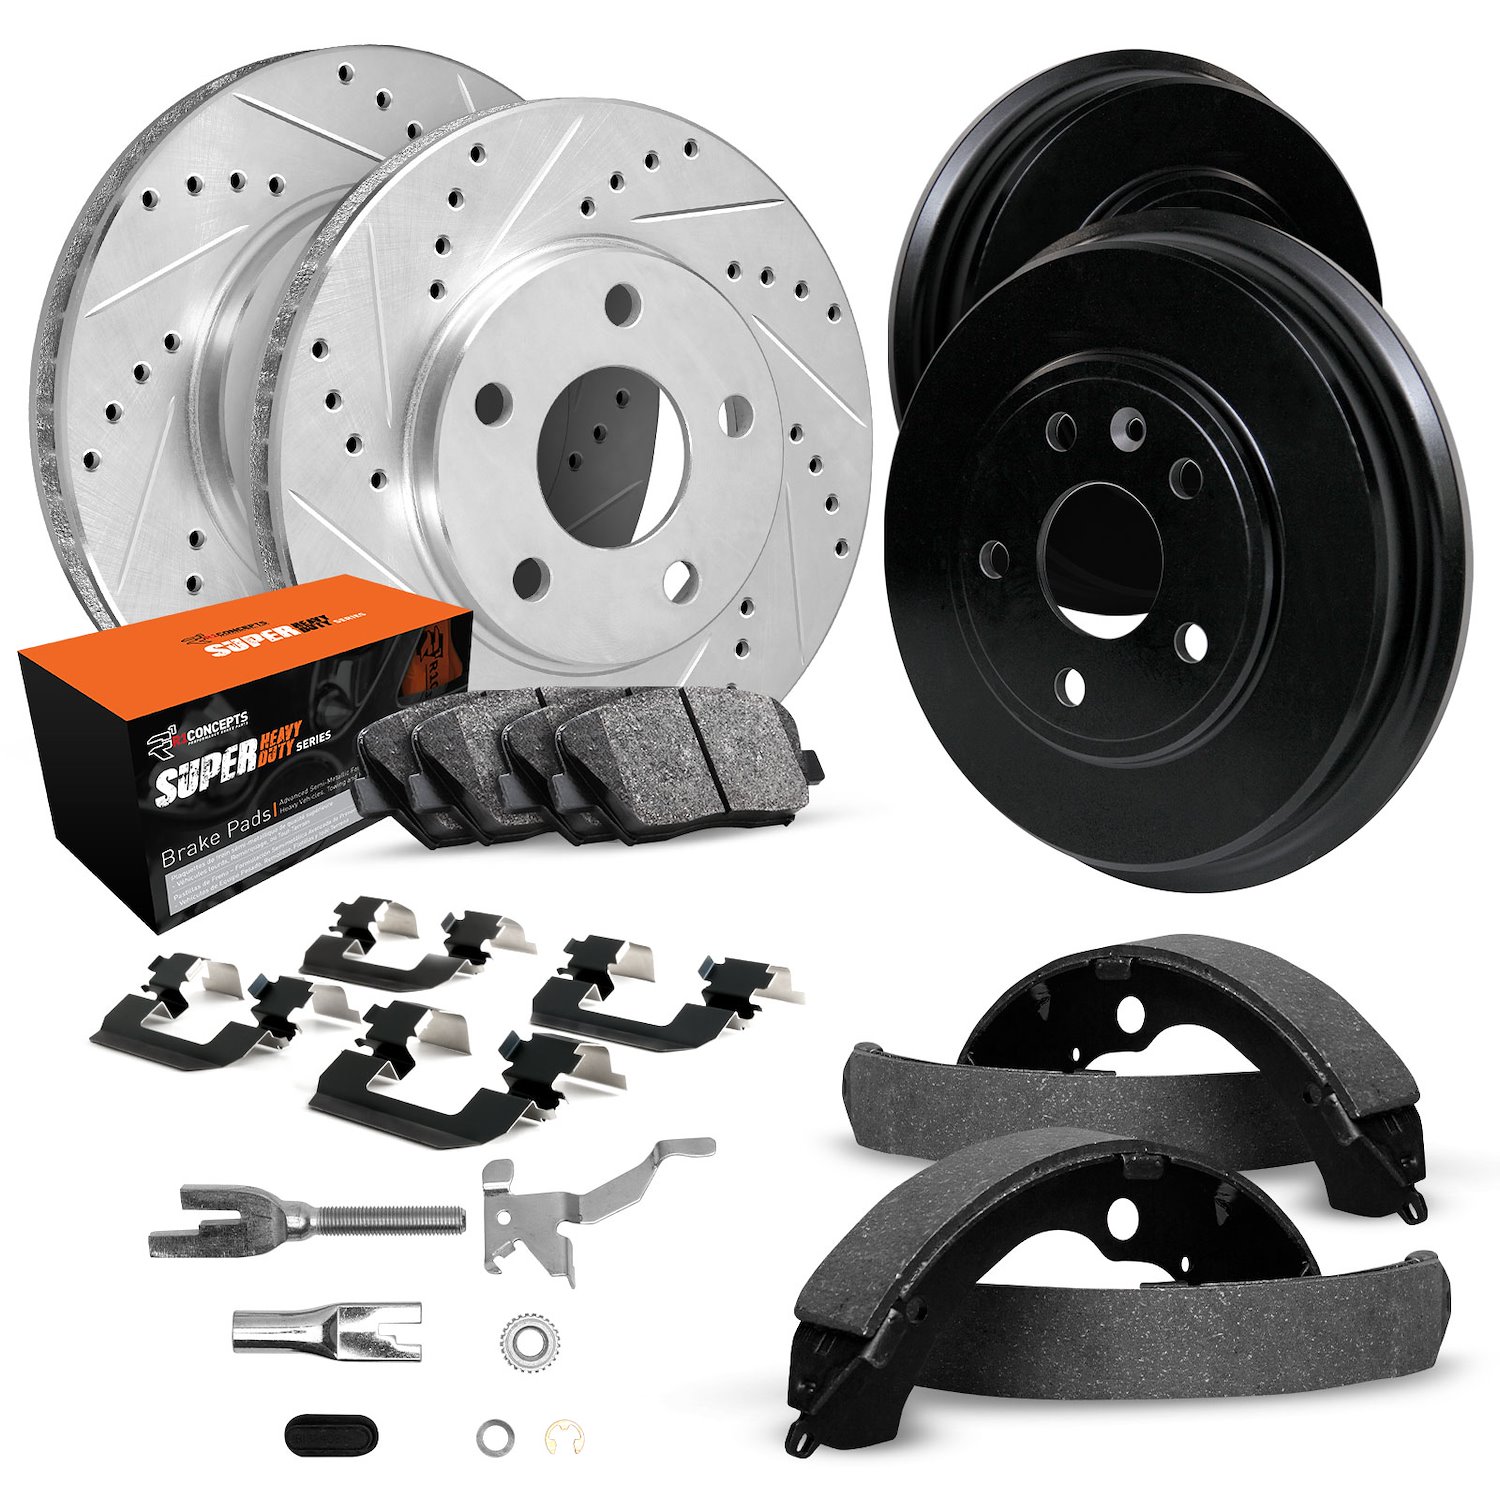 E-Line Drilled/Slotted Silver Rotor & Drum Set w/Super-Duty Pads, Shoes/Hardware/Adjusters, 1977-1980 Ford/Lincoln/Mercury/Mazda